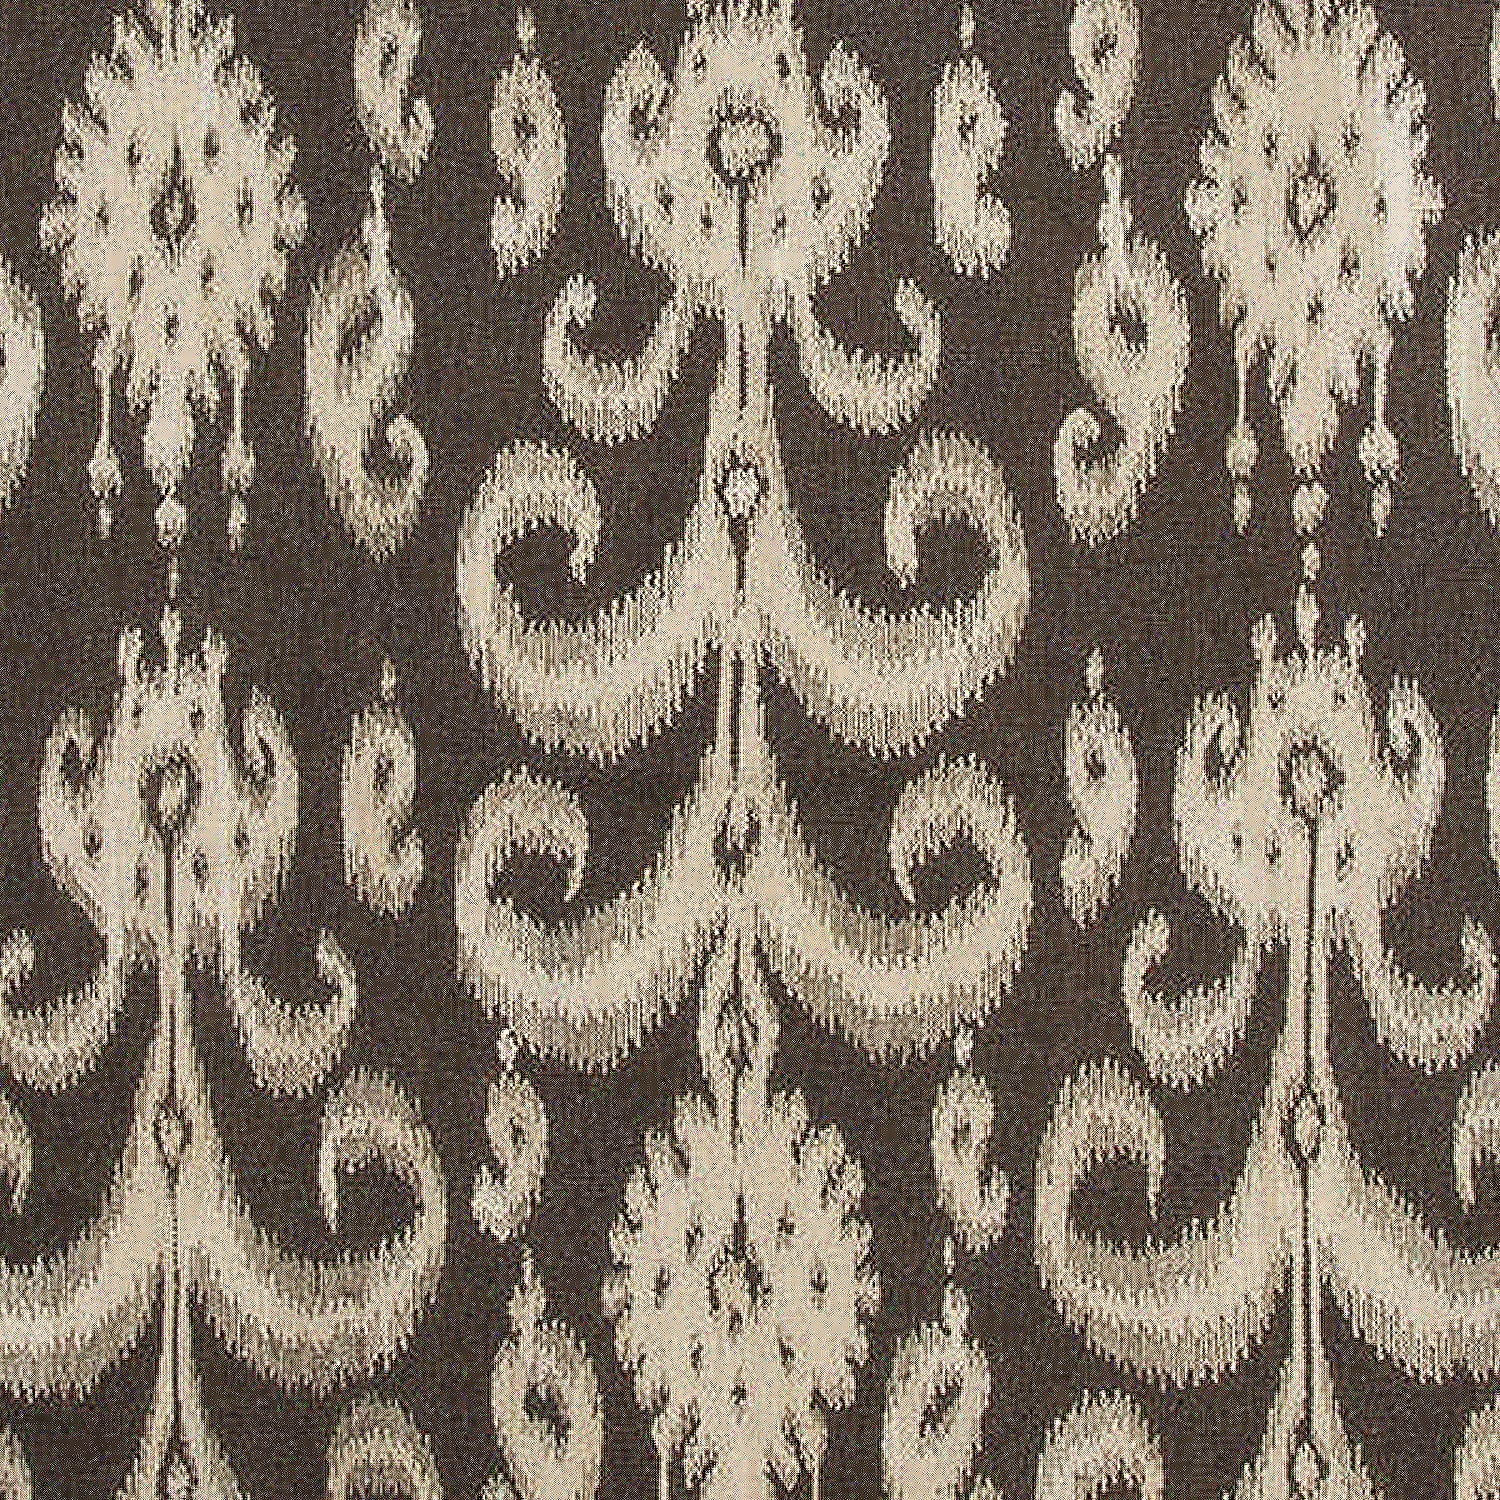 Detail of a woven rug with a cream ikat fleur de lis pattern on a black field.